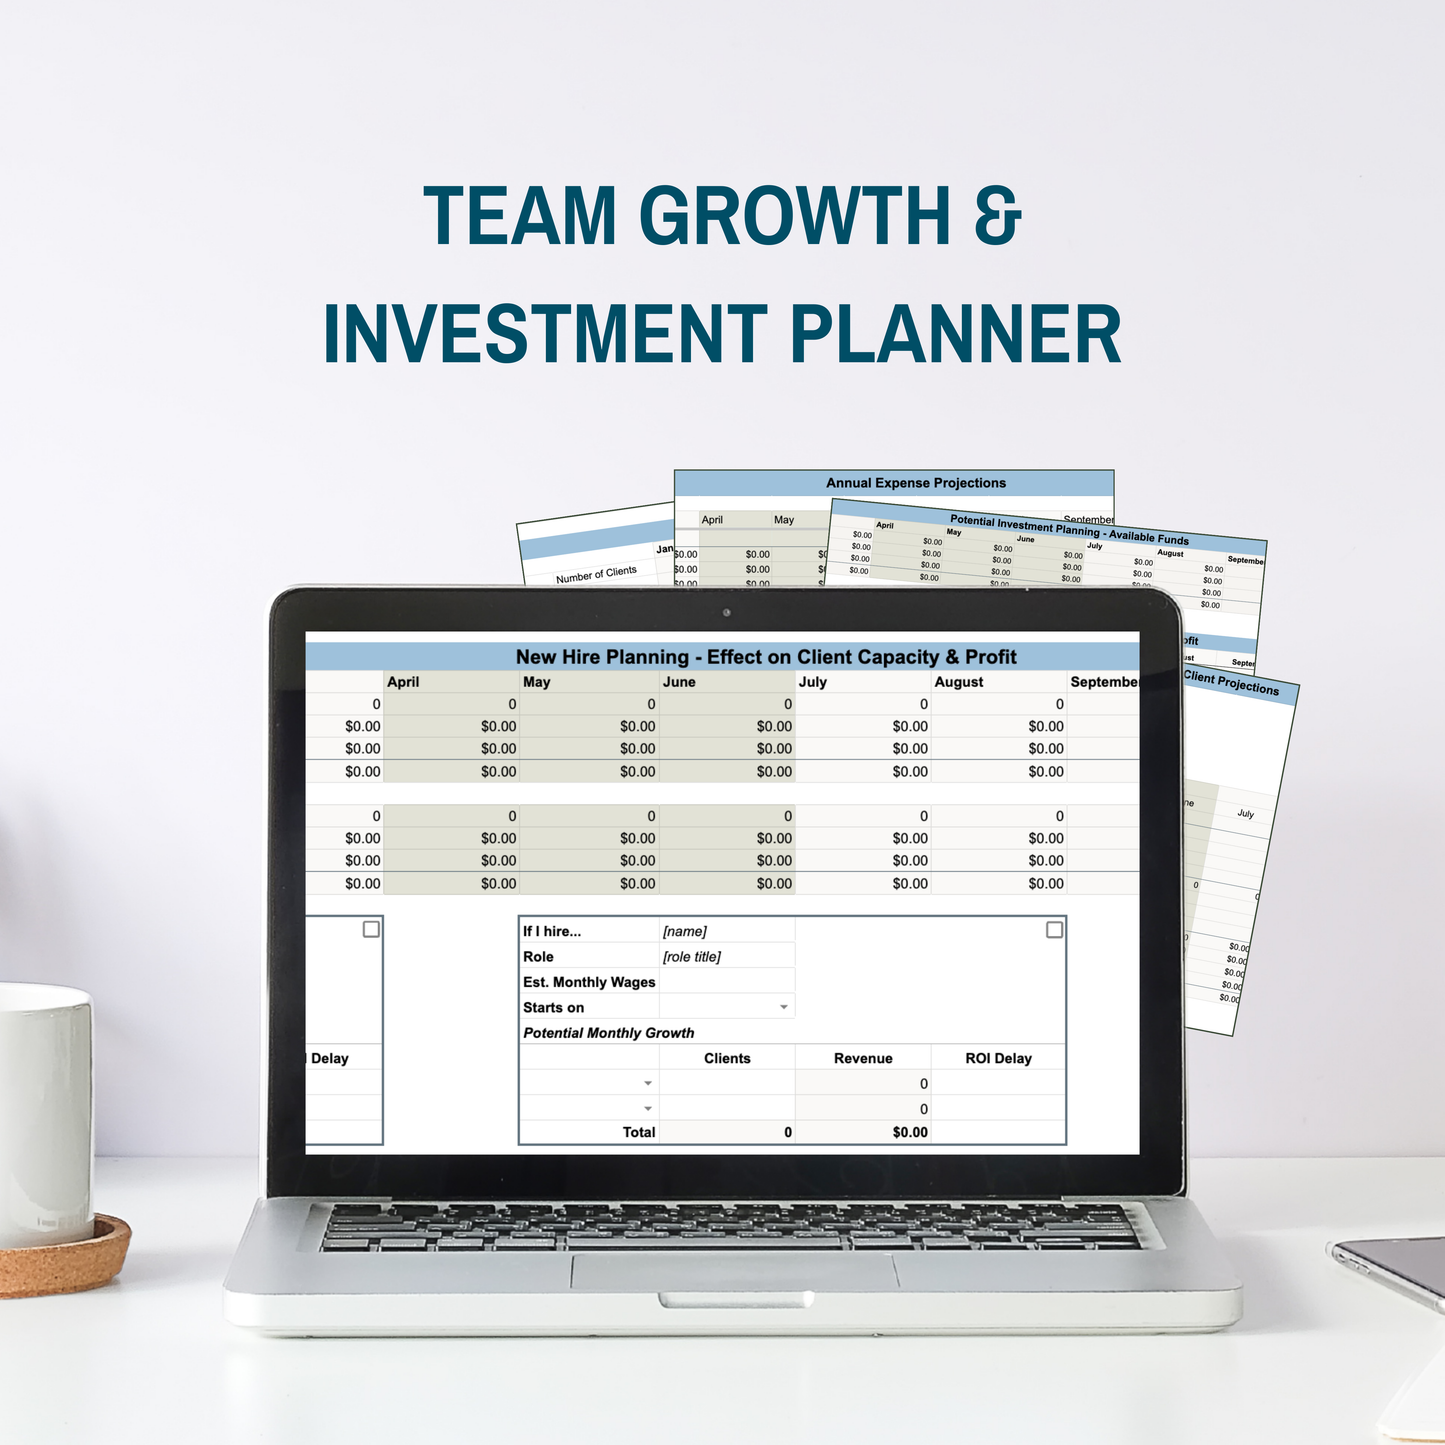 Team Growth & Investment Planner